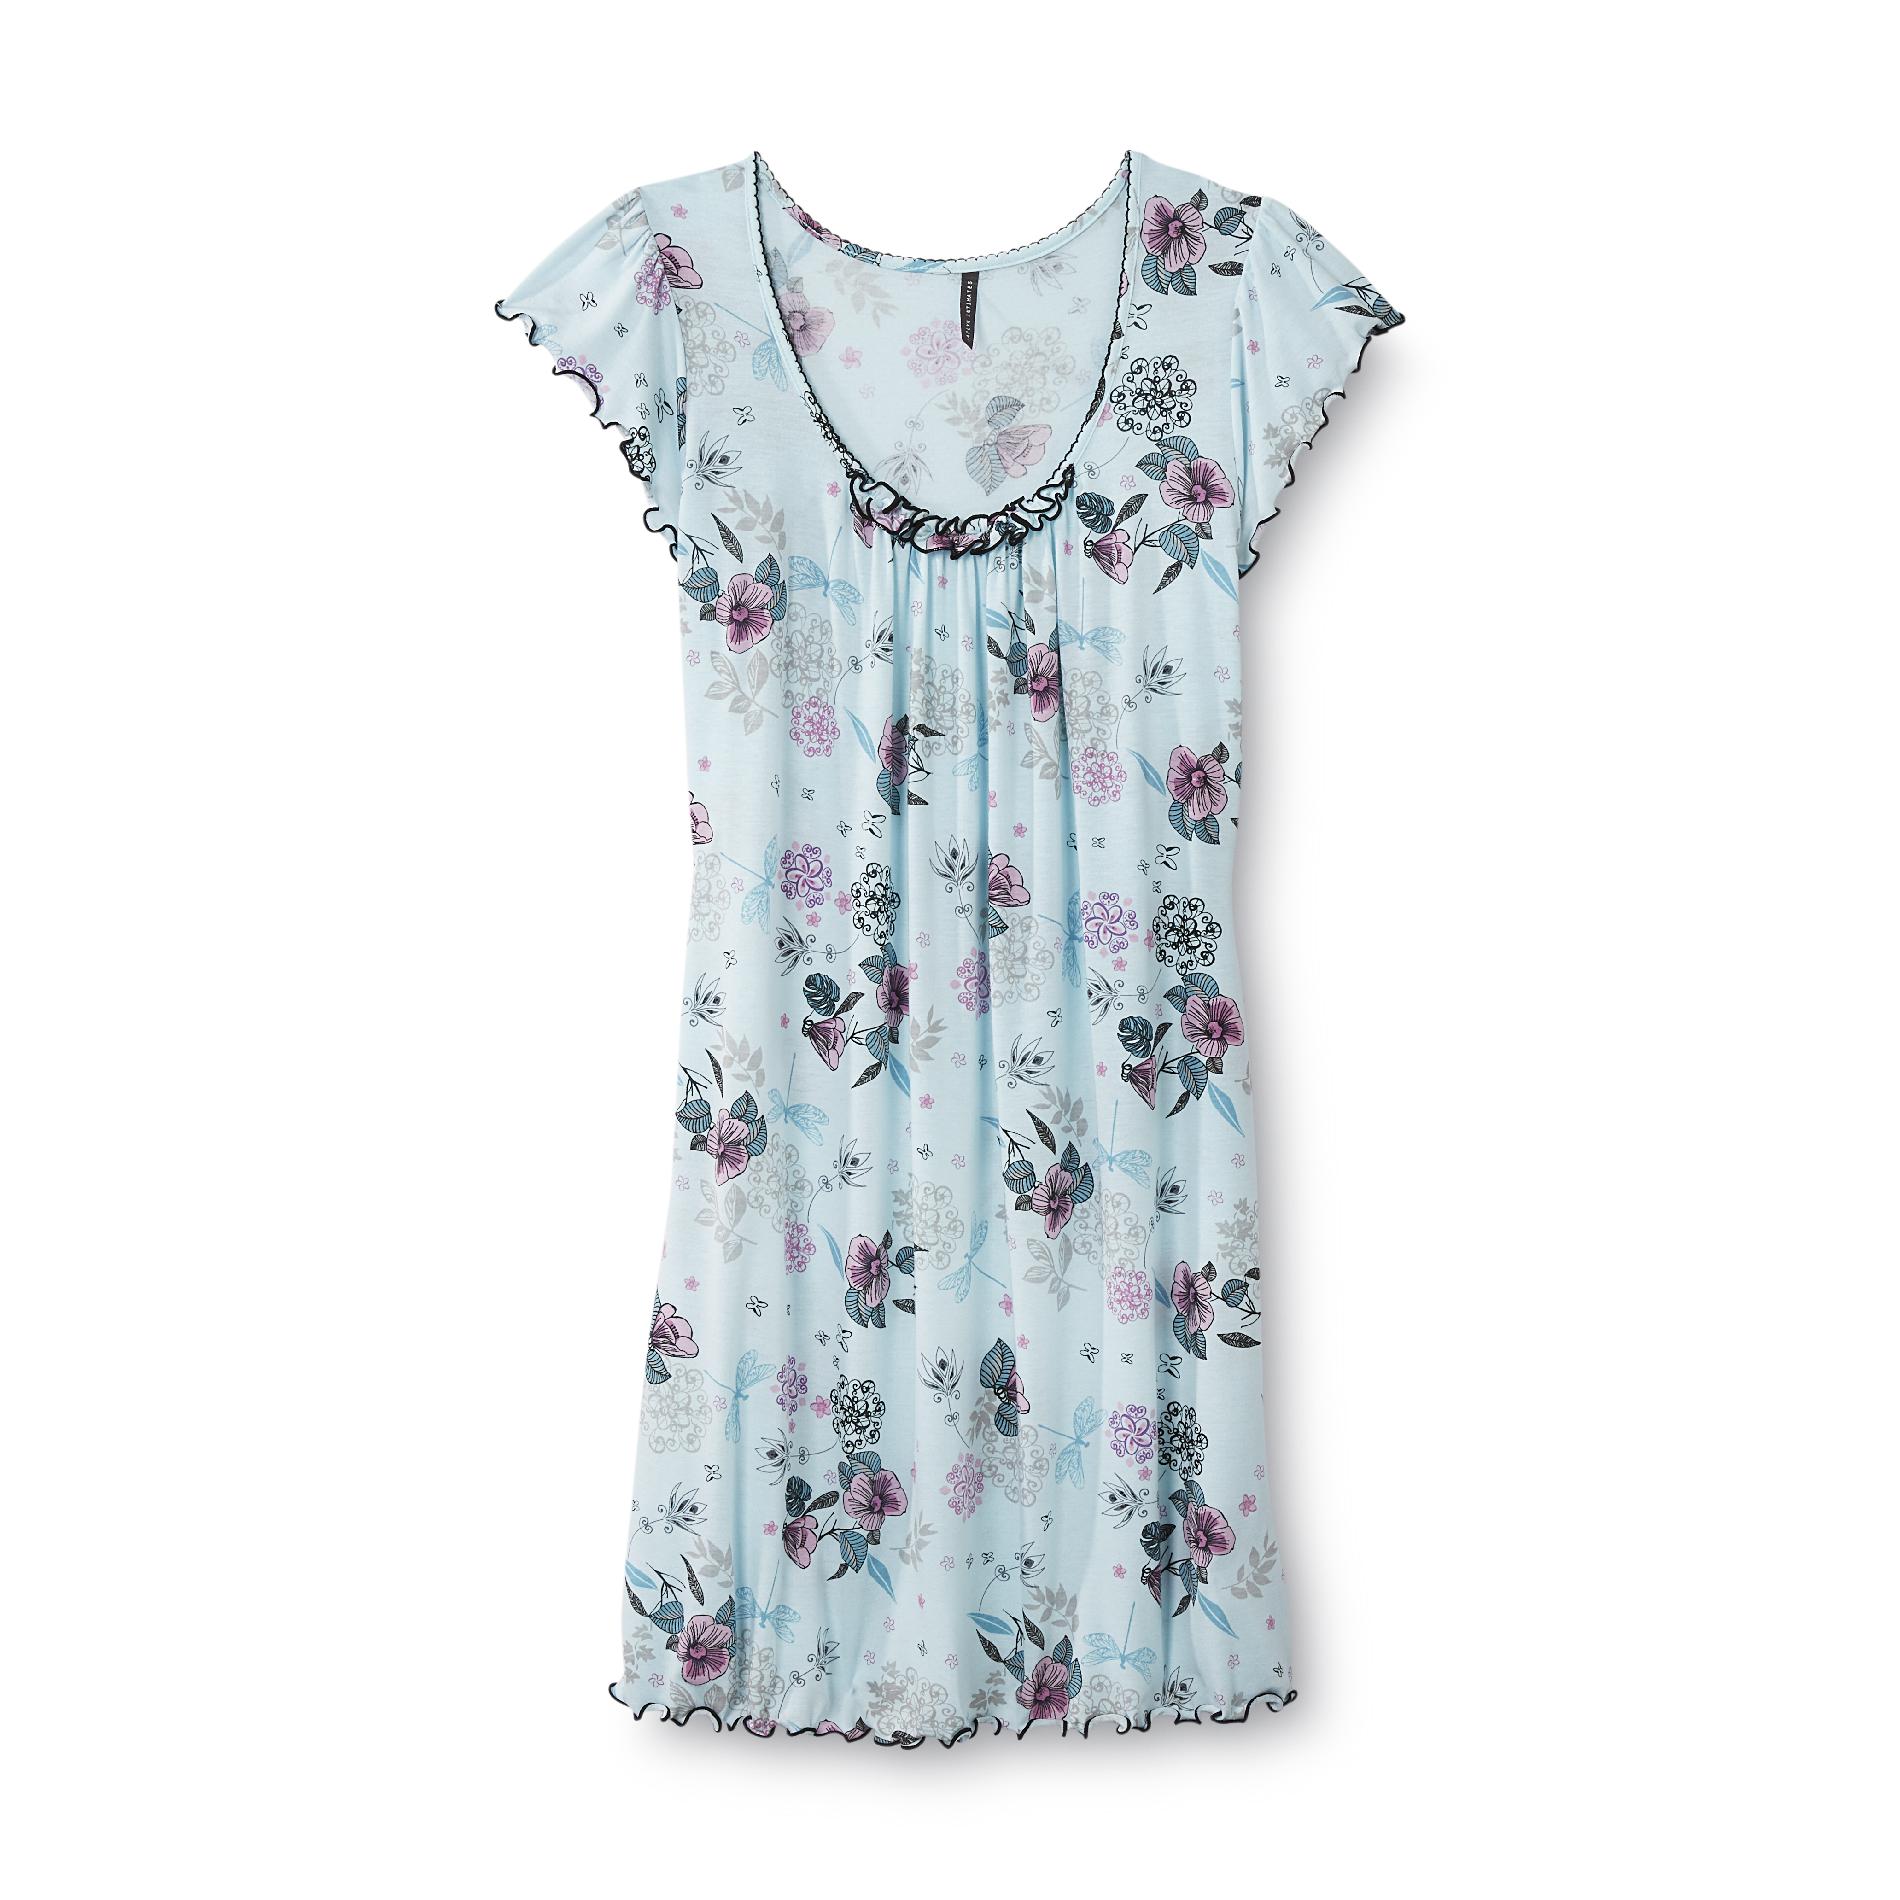 Jaclyn Intimates Women's Short-Sleeve Nightgown - Floral